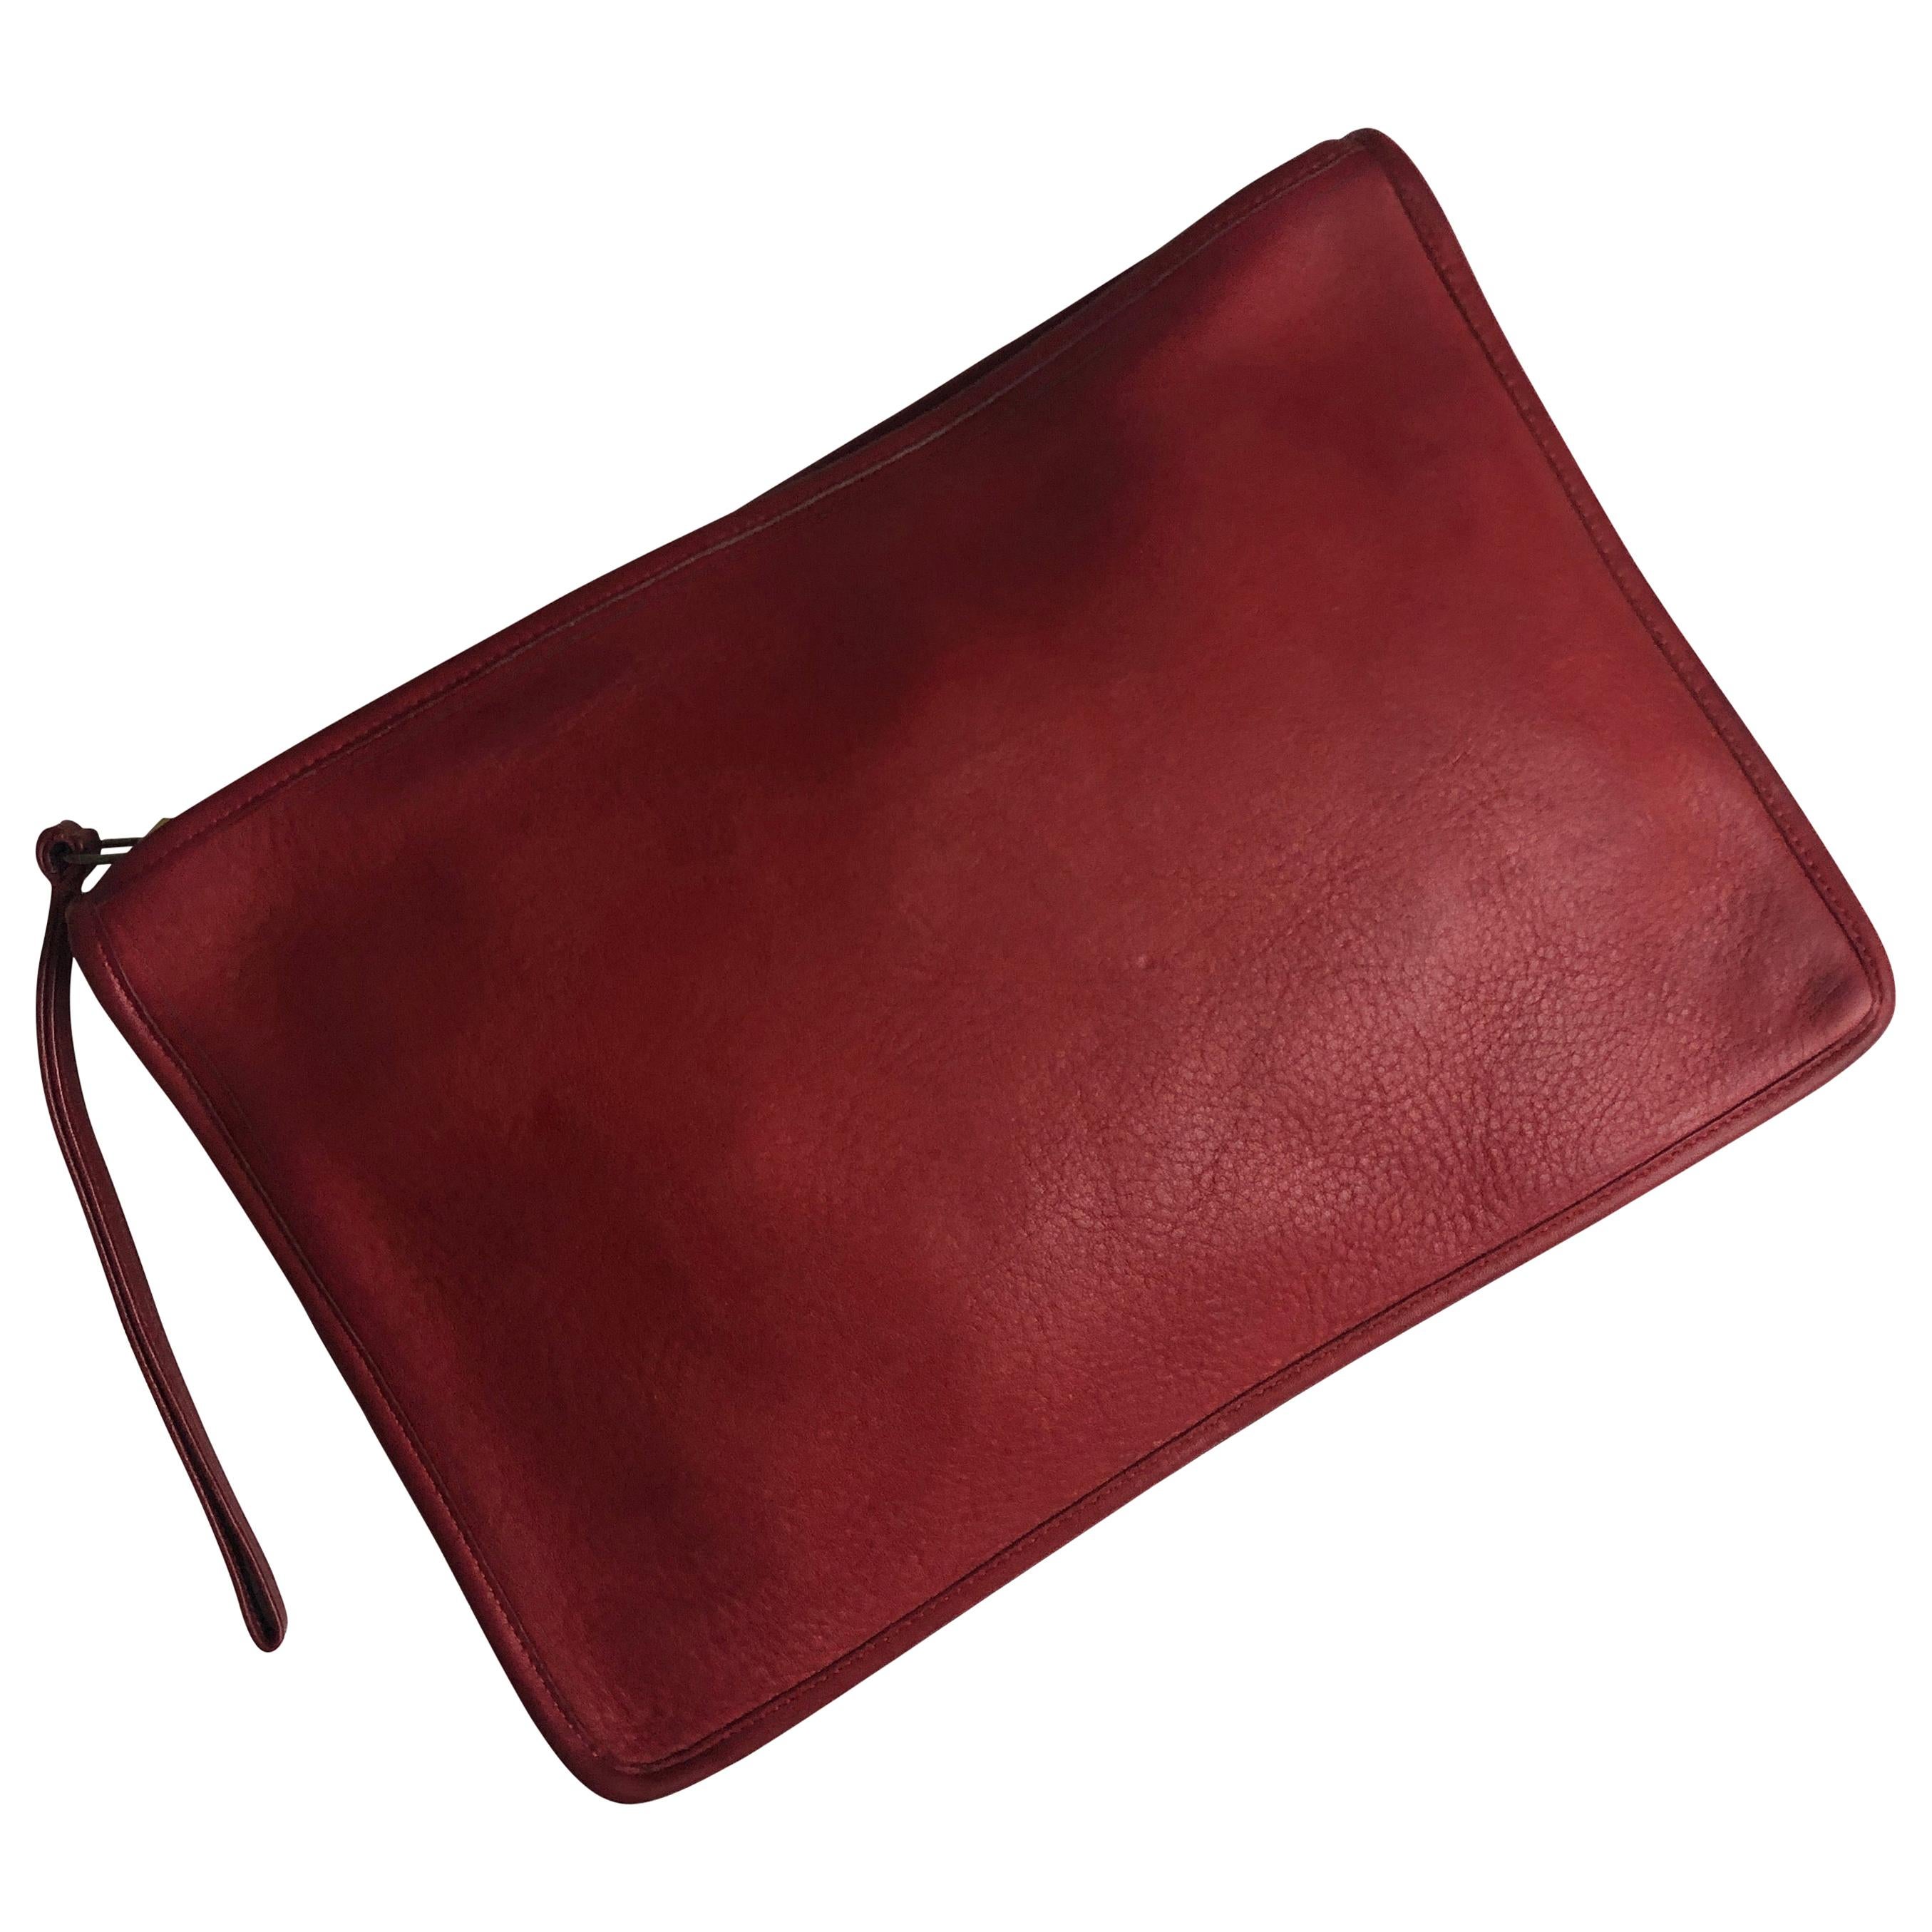 Vintage Bonnie Cashin for Coach Large Slim Clutch Bag Red Leather NYC 70s 